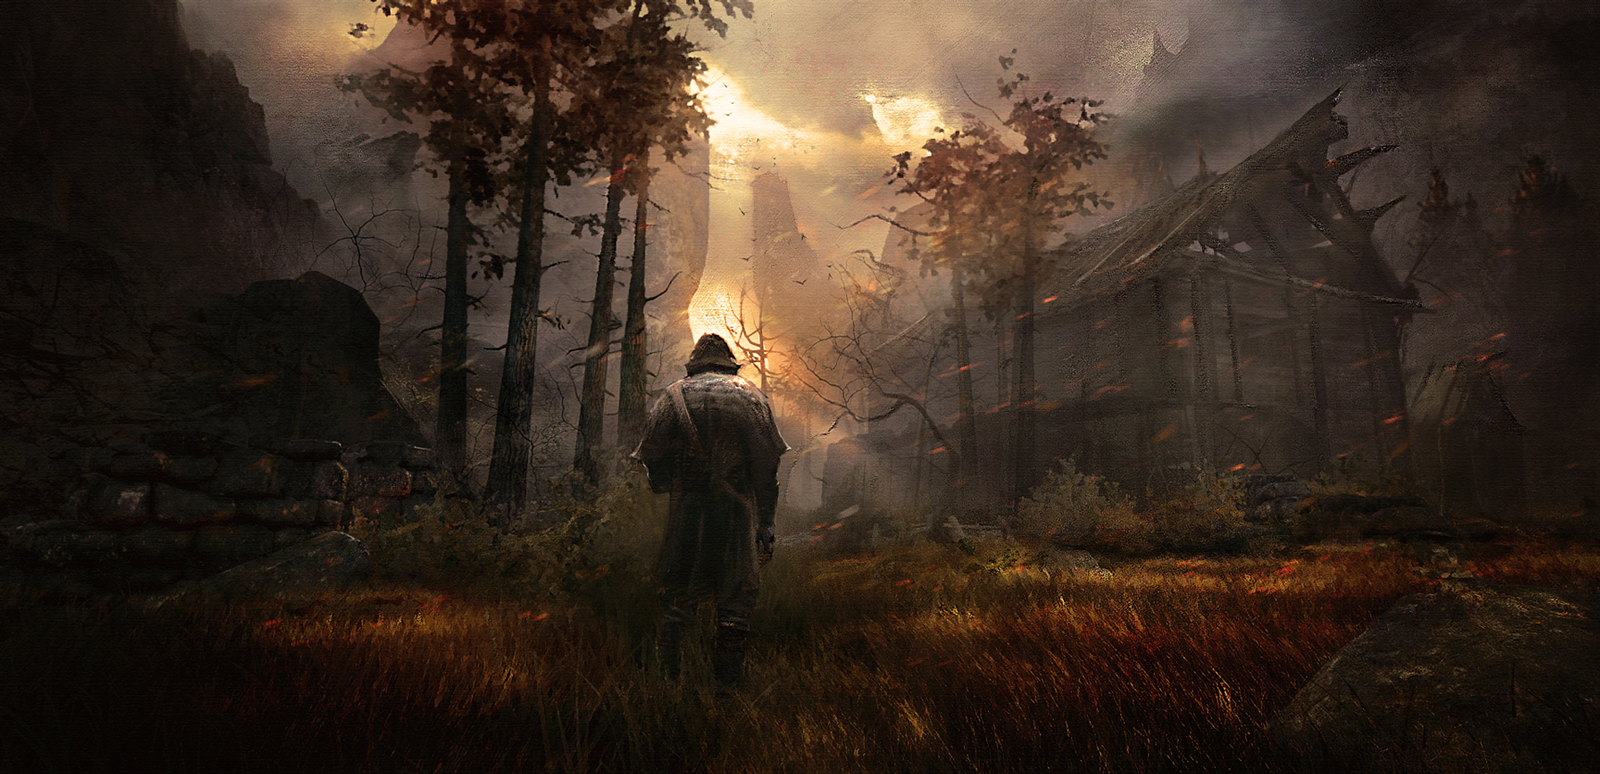 Media asset in full size related to 3dfxzone.it news item entitled as follows: Focus Home e Spiders pubblicano il reveal trailer del game GreedFall | Image Name: news25794_GreedFall-Image_4.jpg